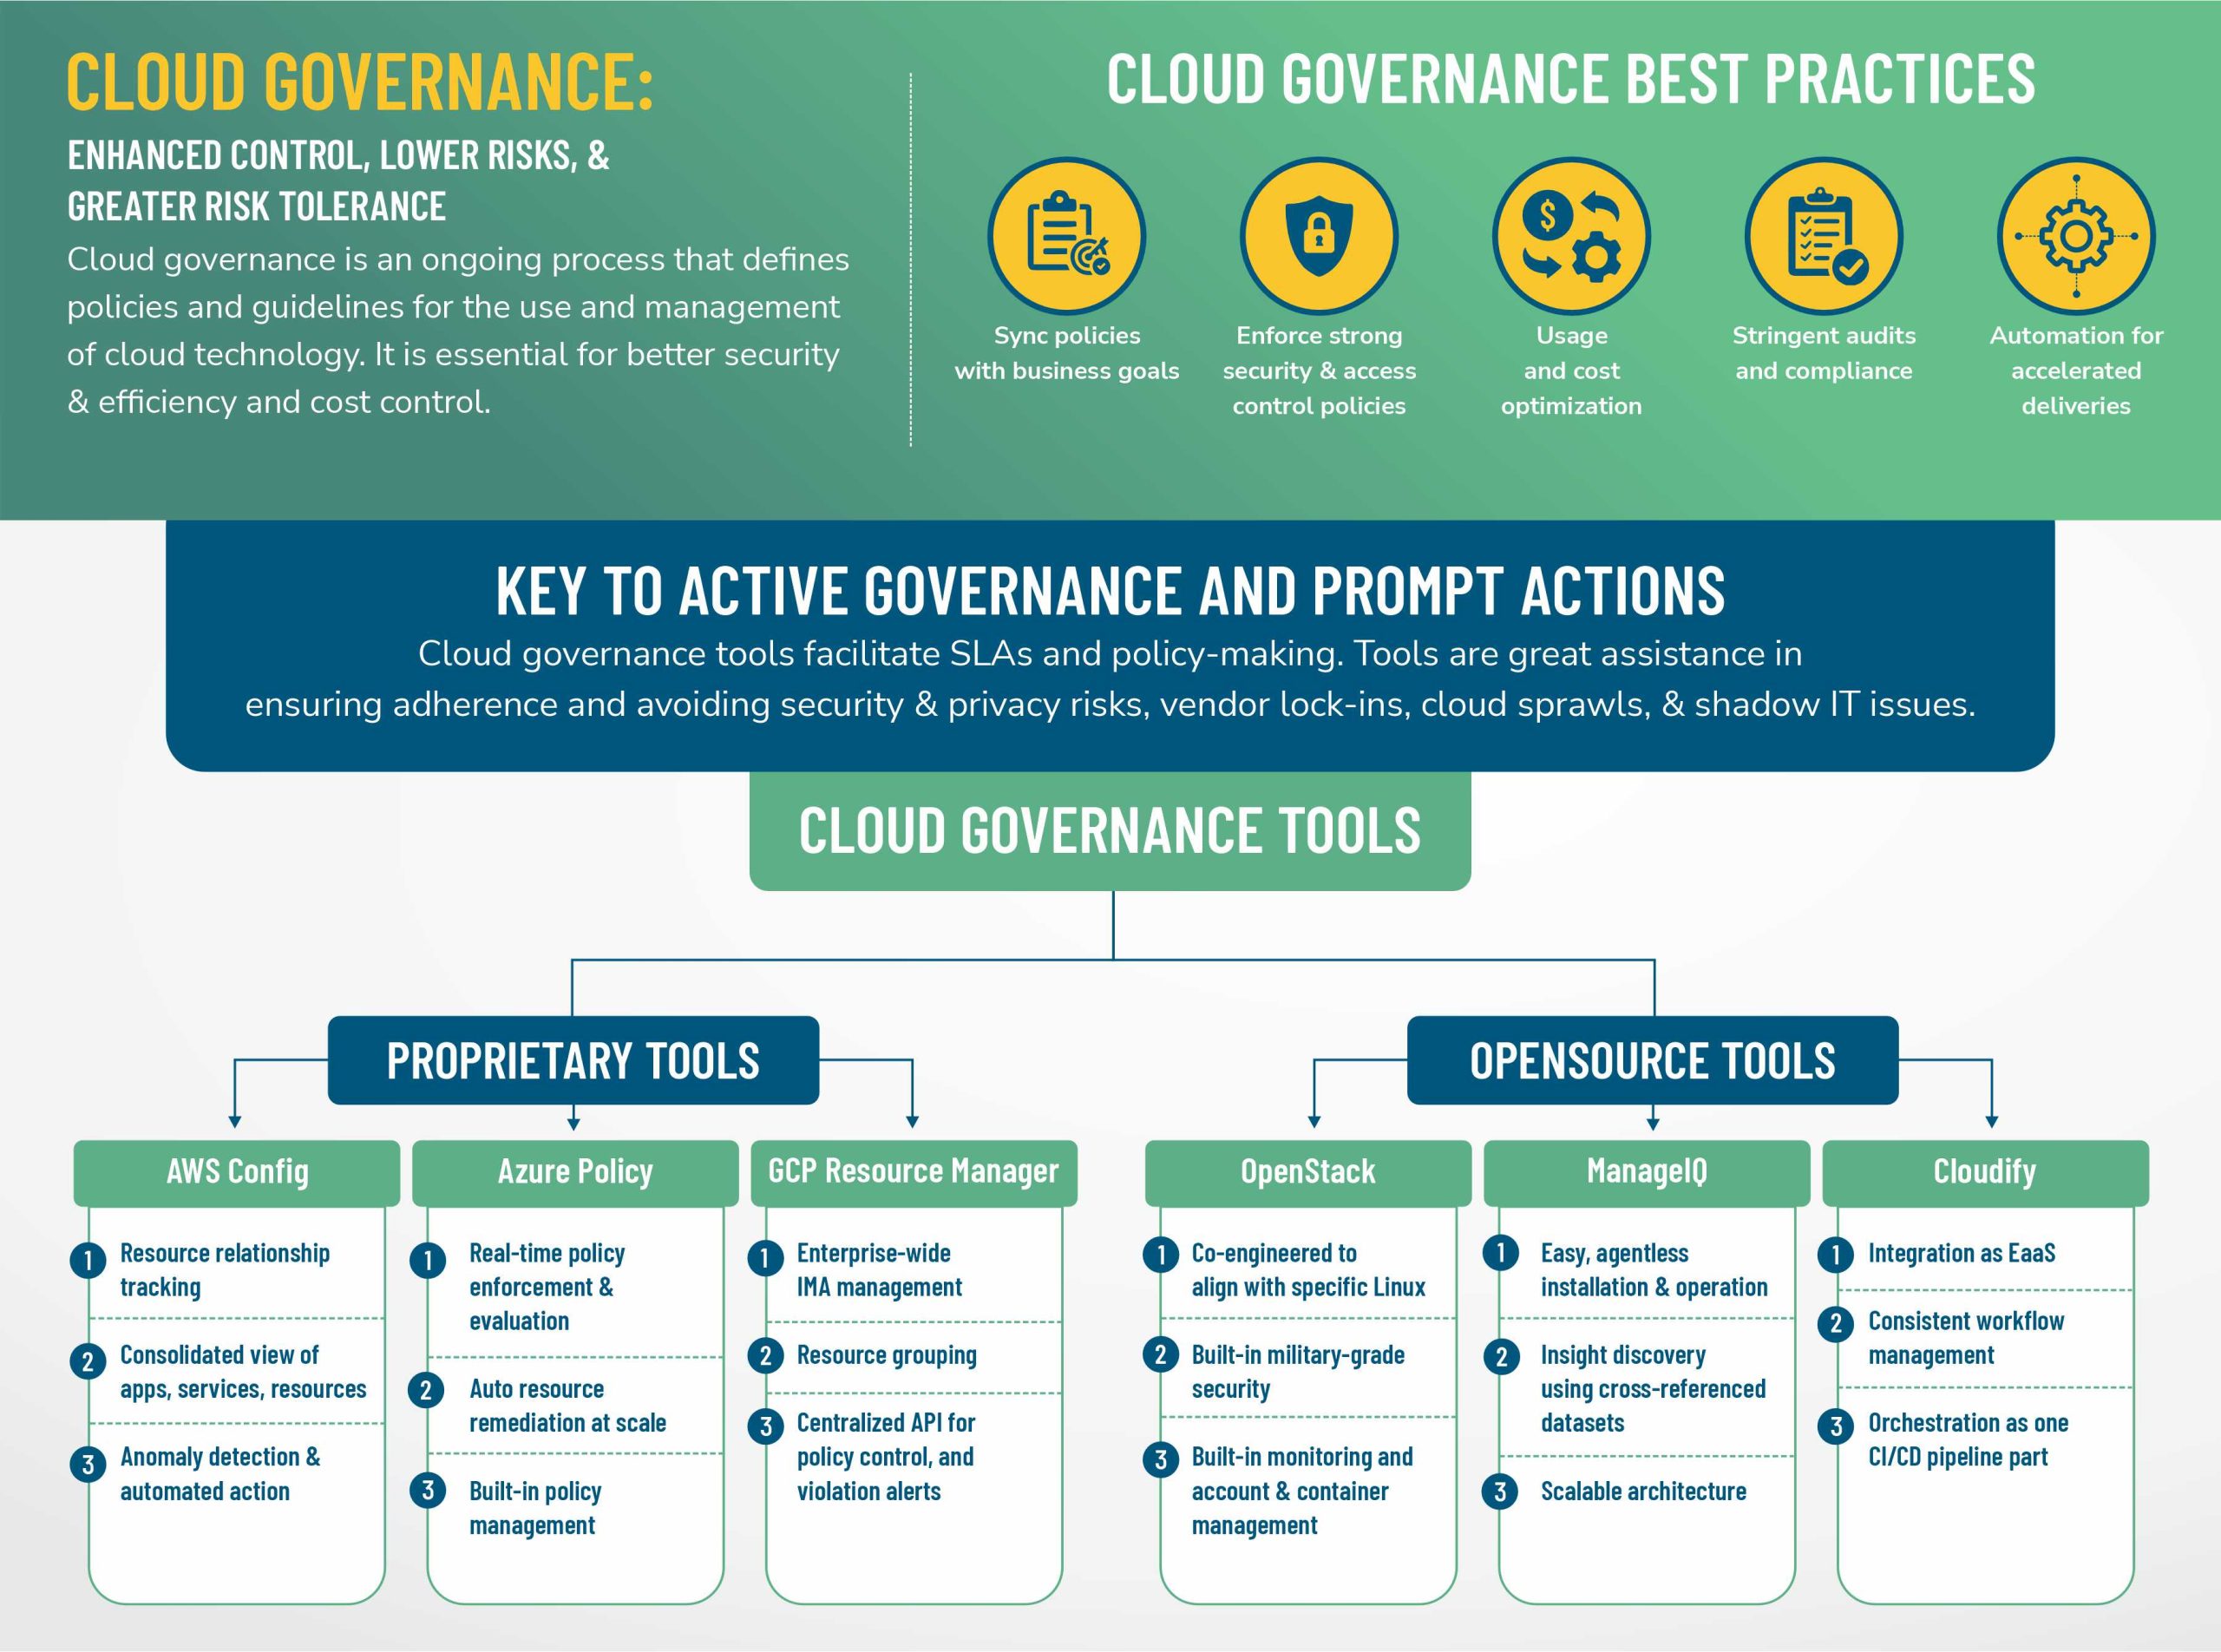 proprietary and open-source cloud governance tools